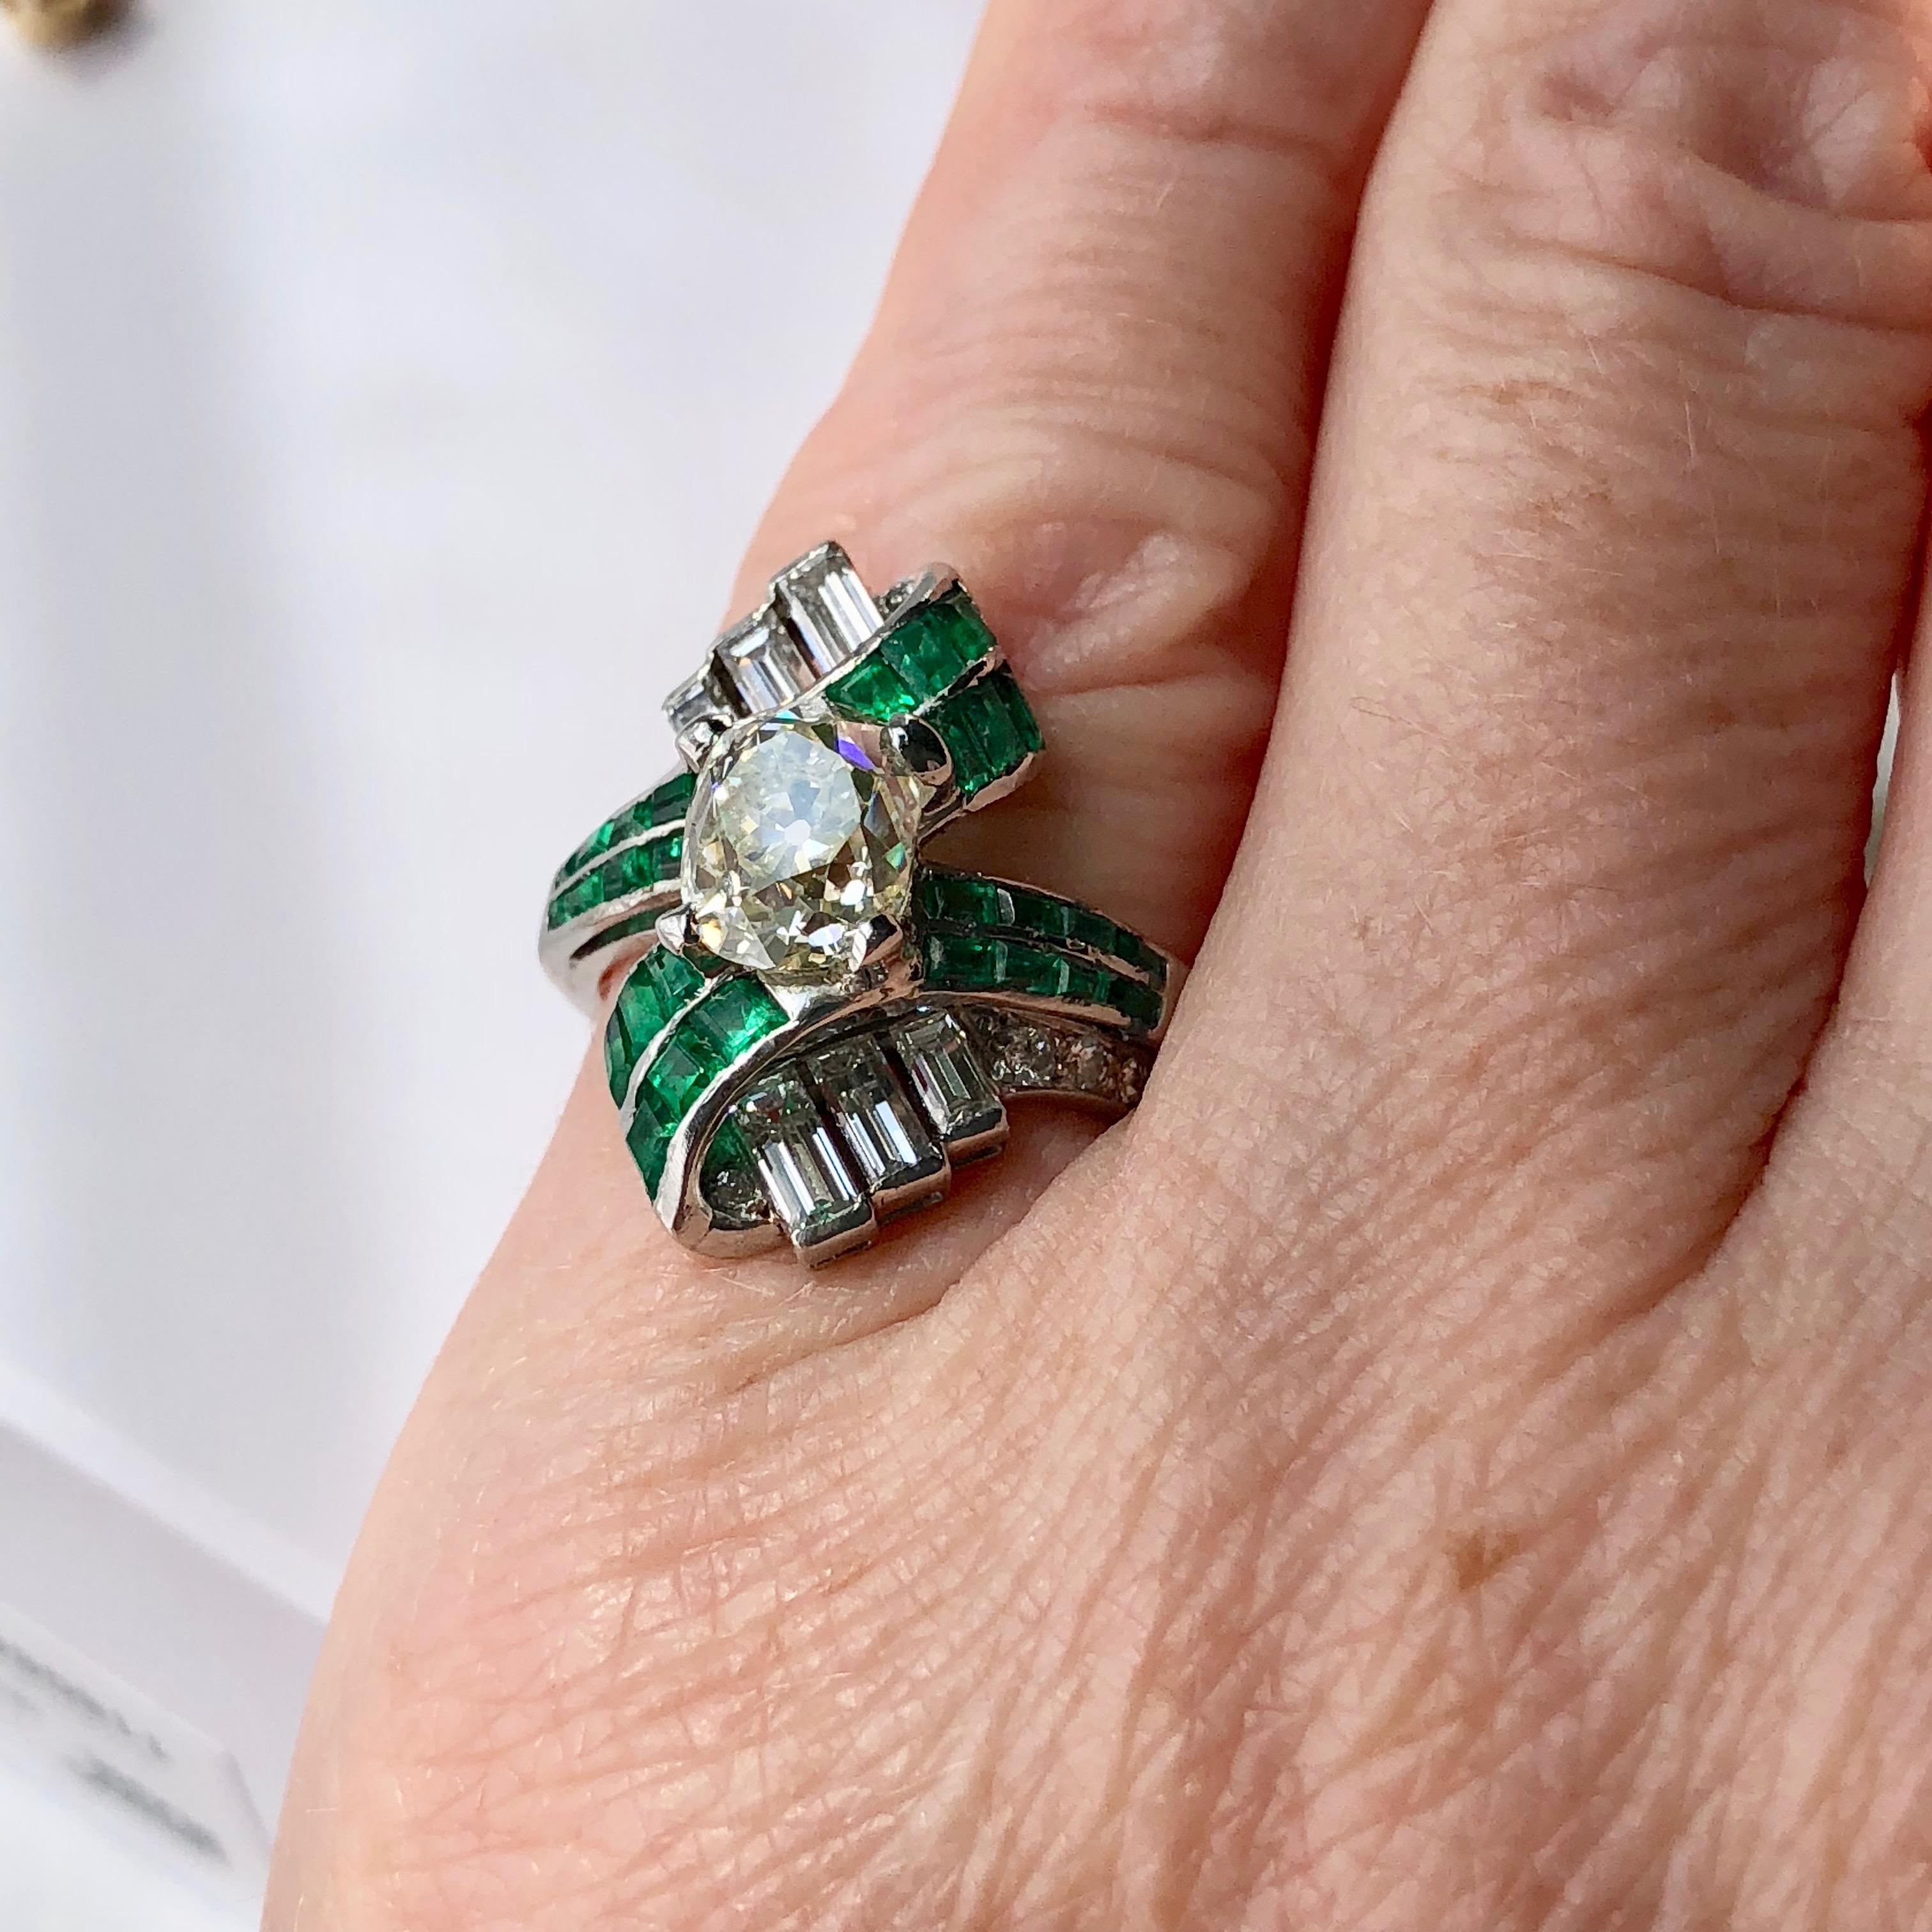 Antique Baguette Emerald And Old Cut Diamond Art Deco Cocktail Engagement Ring  im Angebot 4